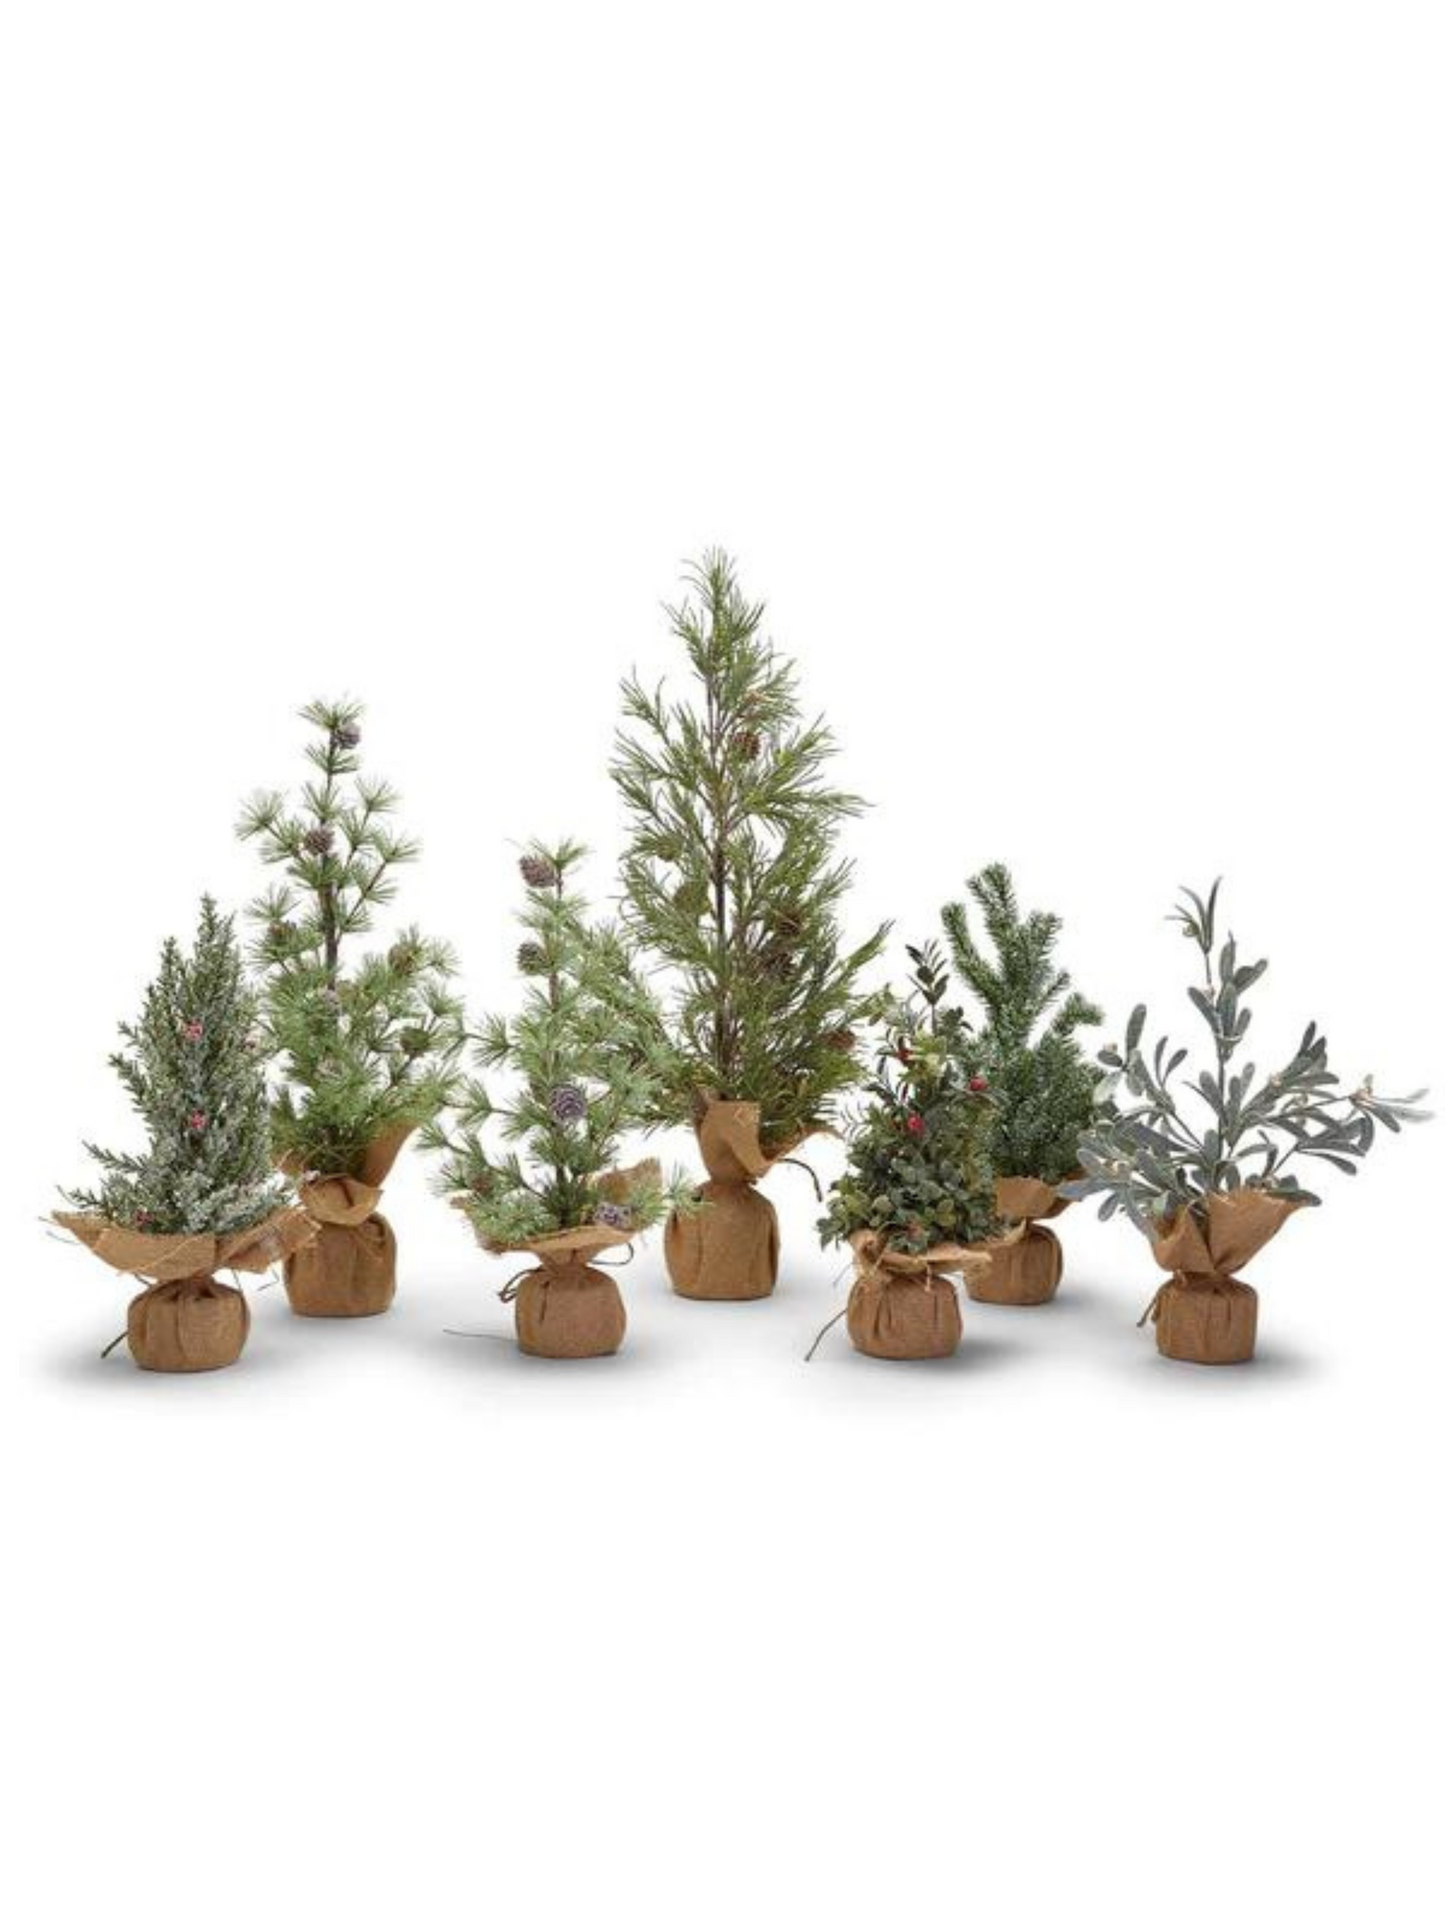 FROSTED EVERGREEN HOLIDAY TREES - THE HIP EAGLE BOUTIQUE